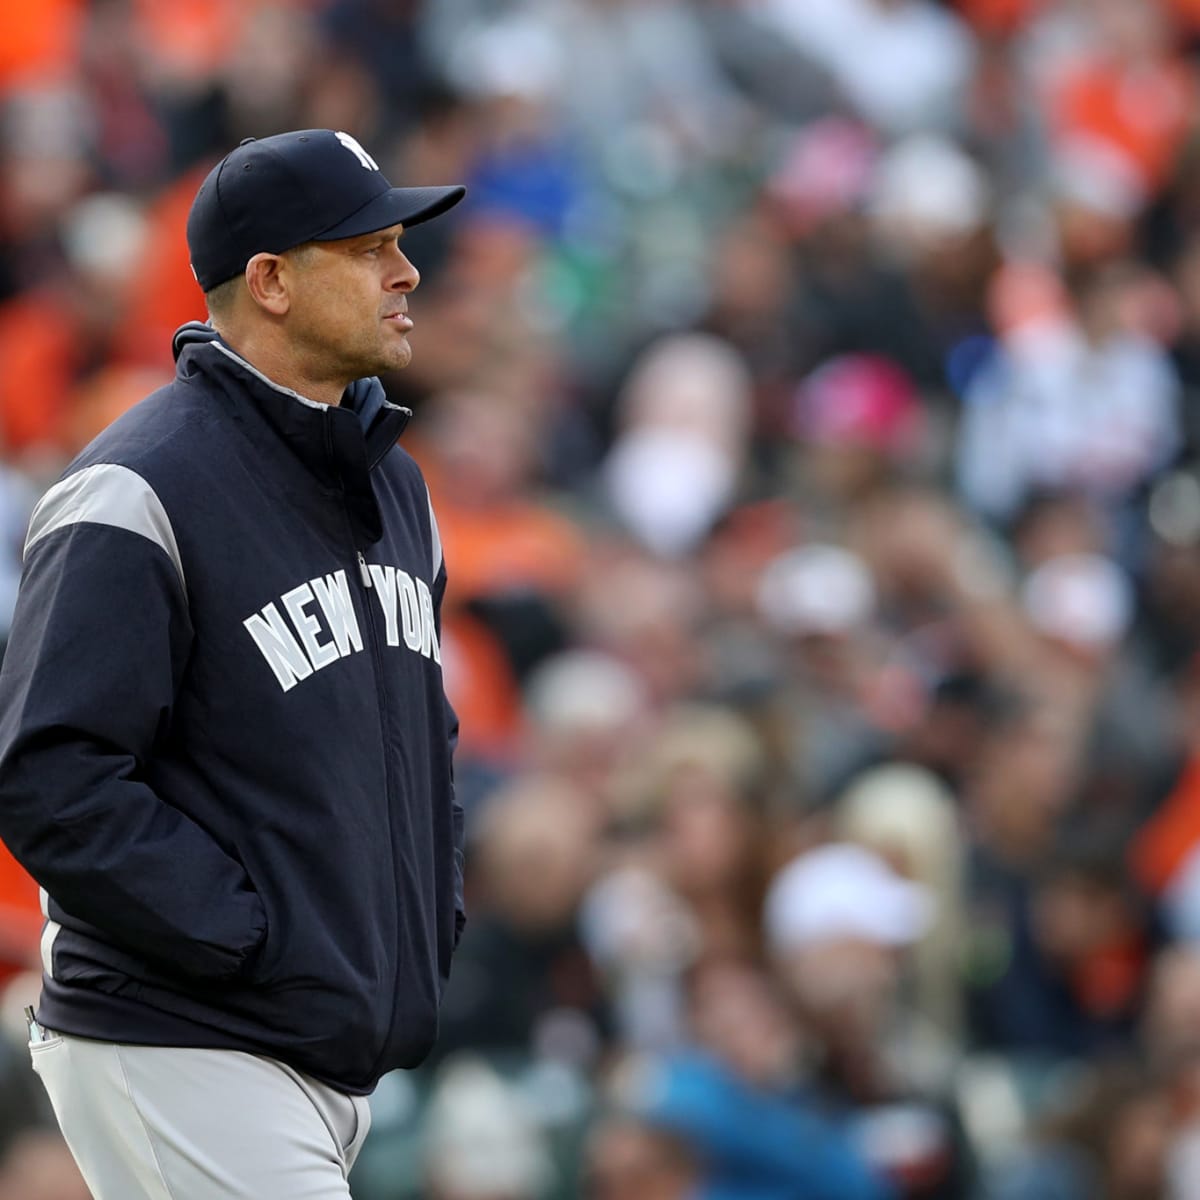 Aaron Boone might get fired after this season?